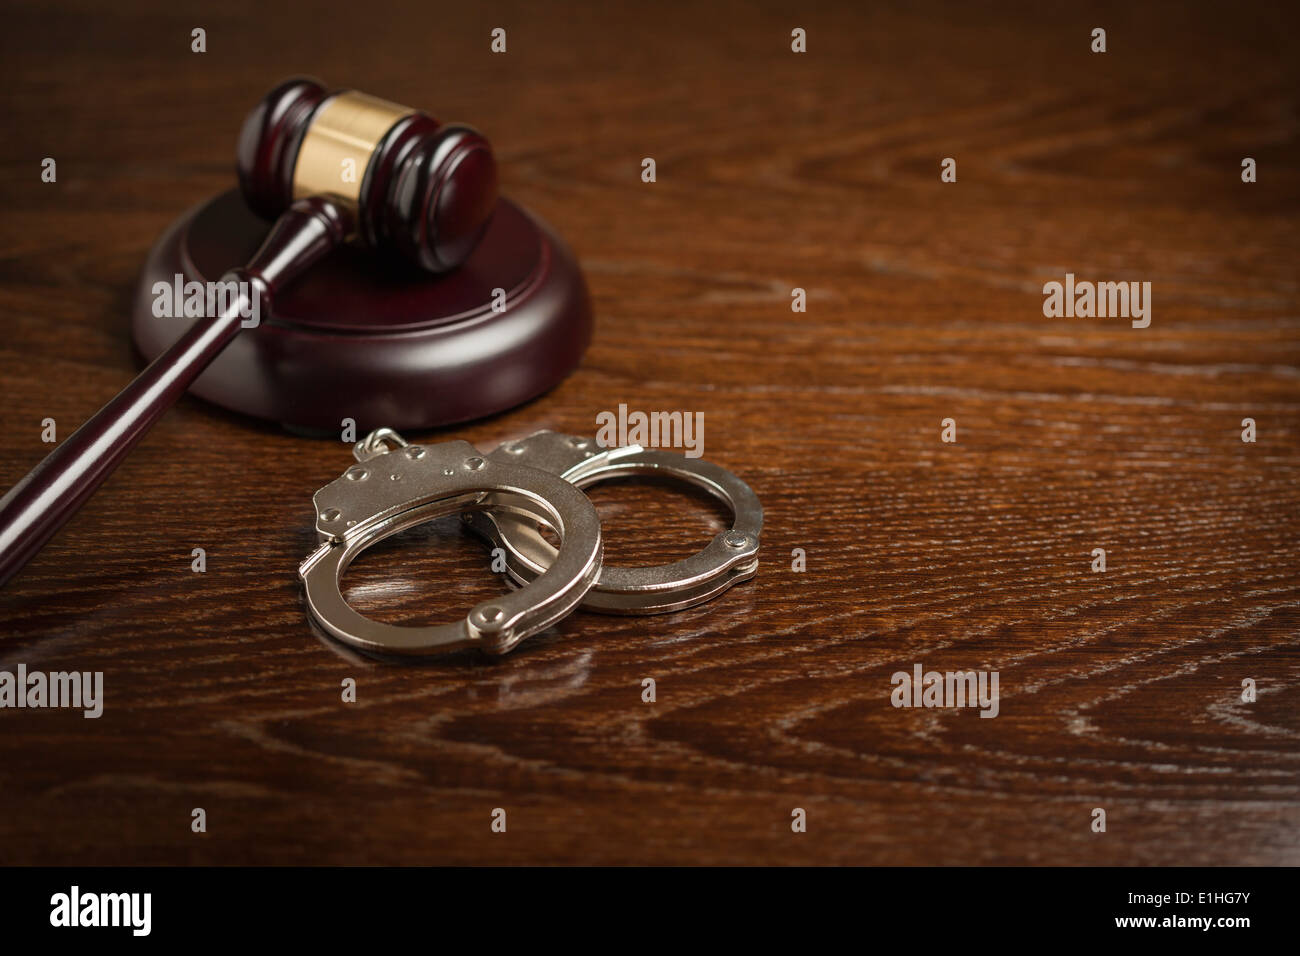 Gavel and Pair of Handcuffs on Wooden Table. Stock Photo